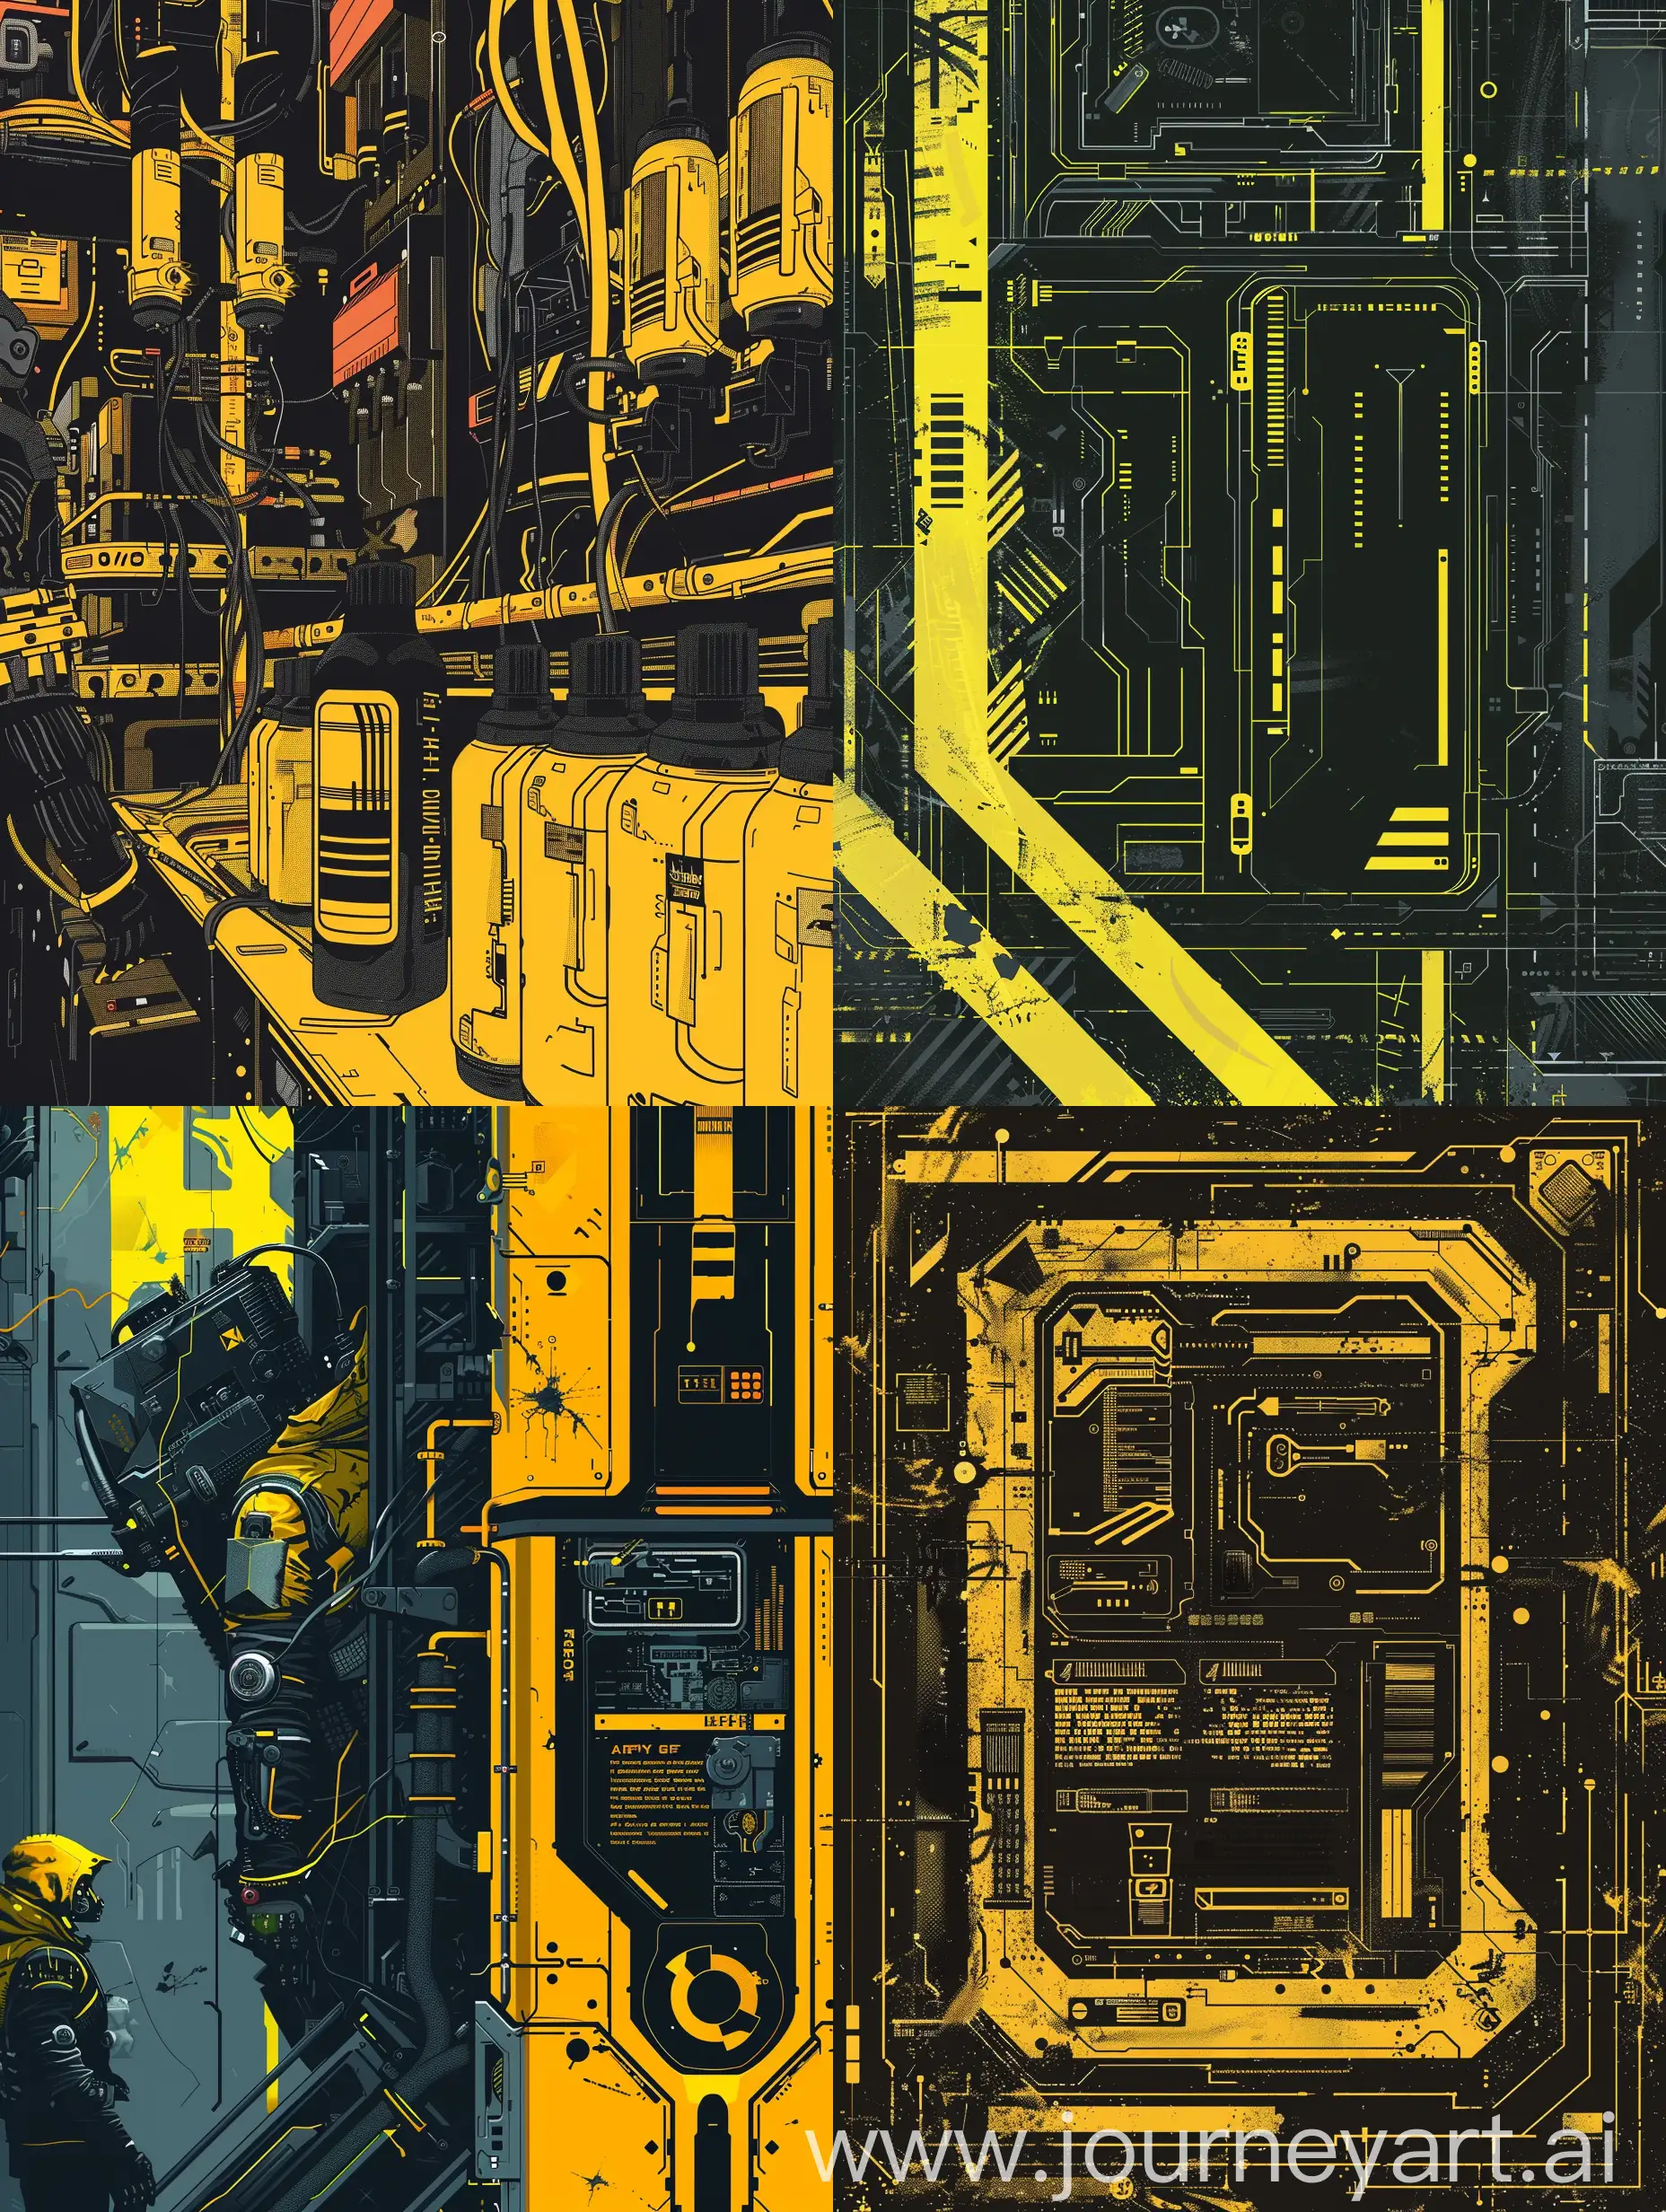 Cyberpunk-Style-Product-Label-Design-in-Yellow-and-Black